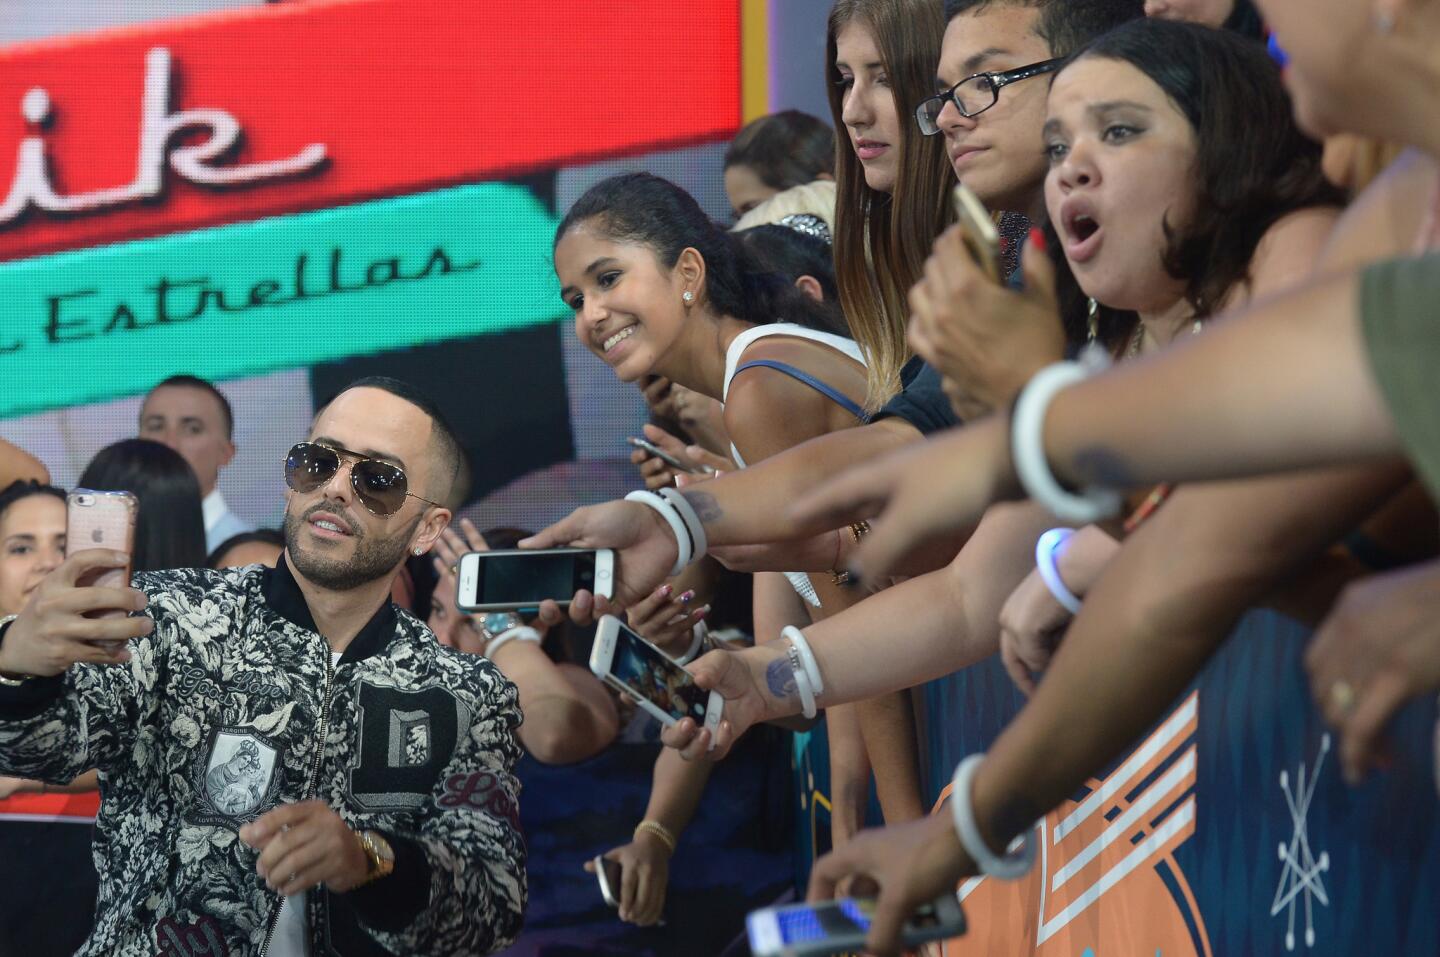 Univision's 13th Edition Of Premios Juventud Youth Awards - Roaming Arrivals